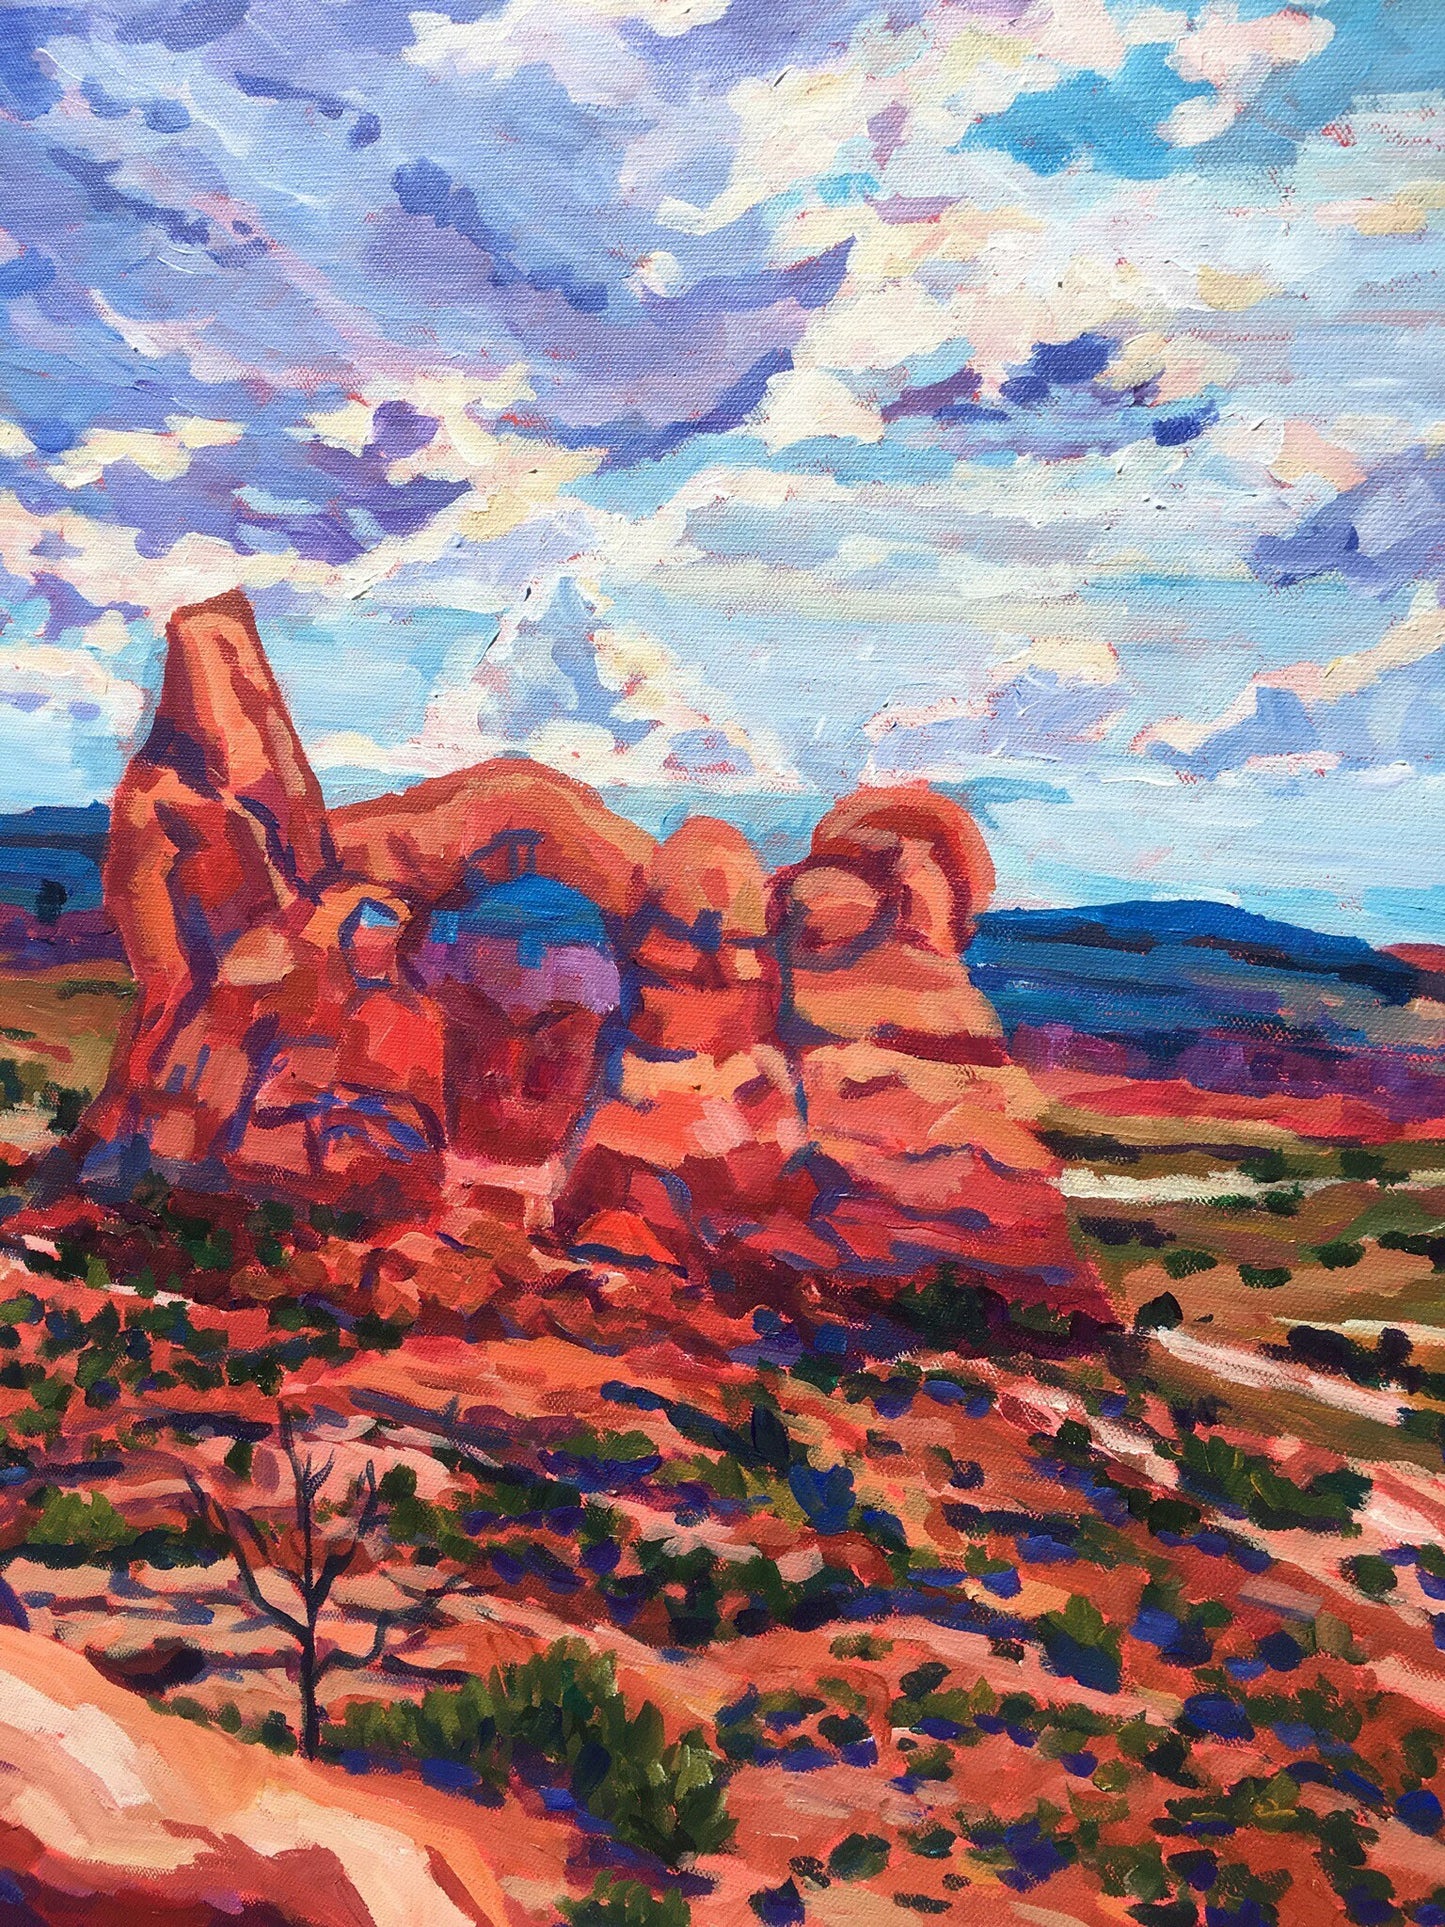 Detail of painting with Turret Arch in Arches National Park